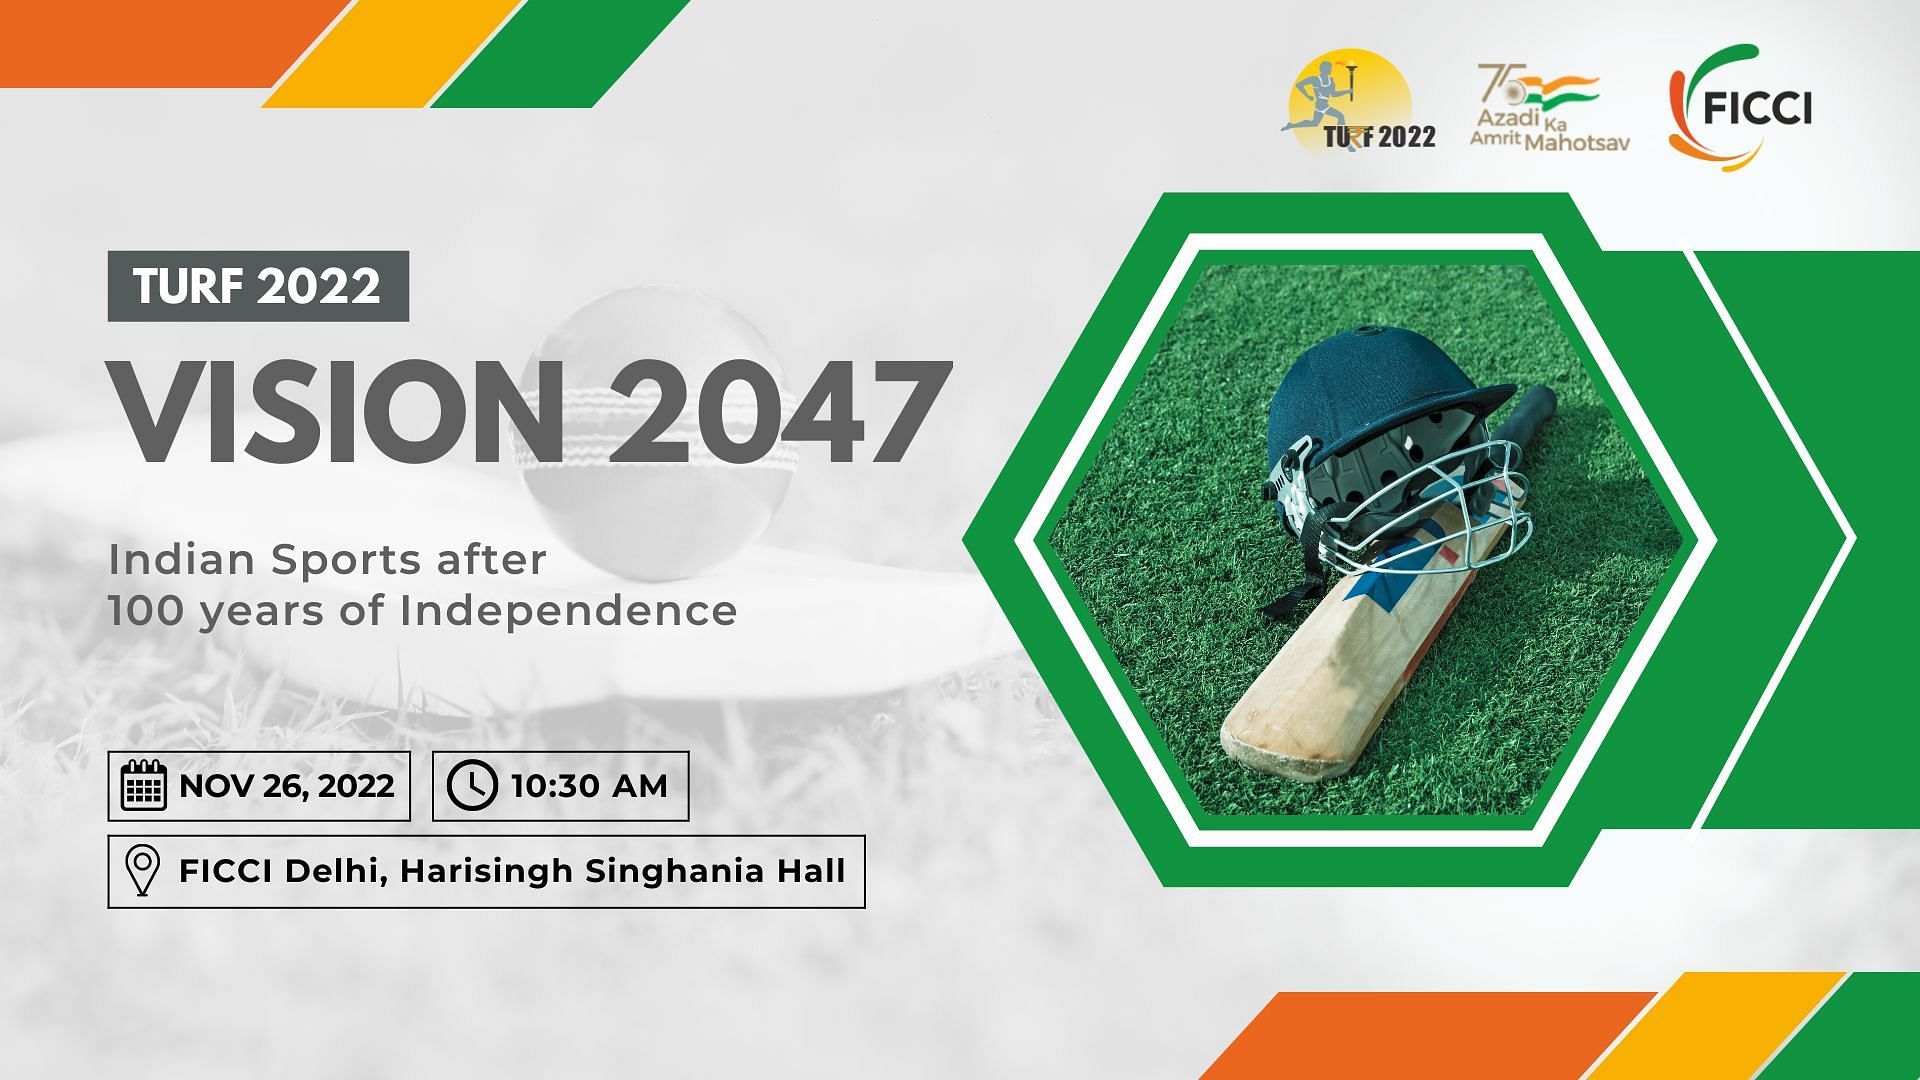 Turf 2022 to be hosted on 26th November from 10:30am